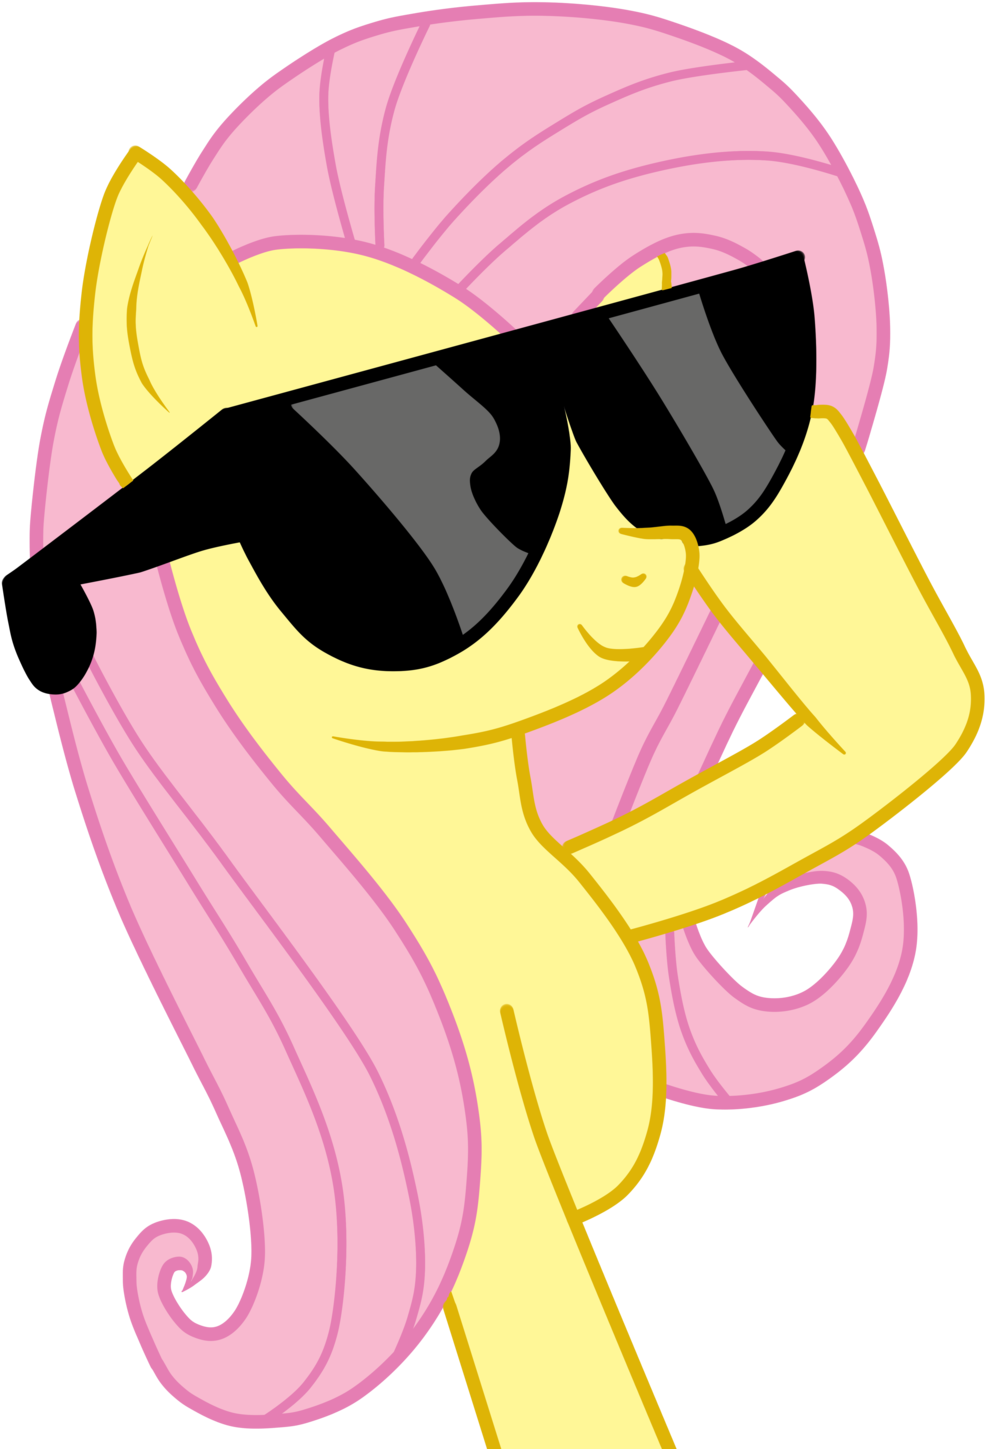 Are You Kidding Me The Newer Episodes Blow The ****** - My Little Pony Fluttershy Wears Sunglasses (1024x1481)